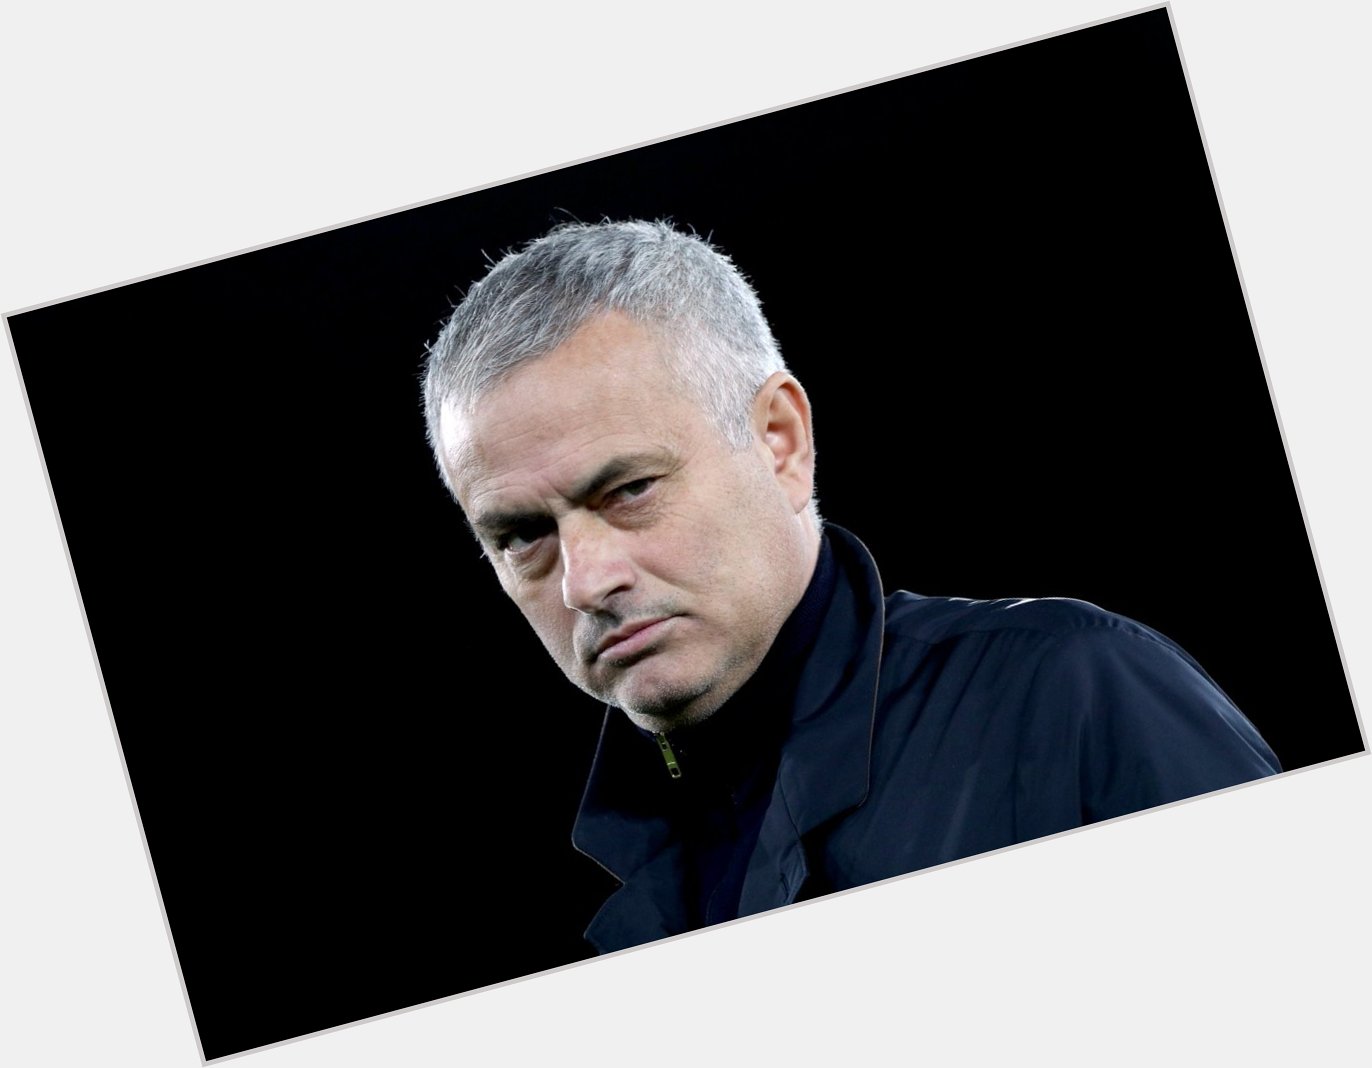 Good morning - and a happy 55th birthday to three-time Premier League champion Jose Mourinho! 